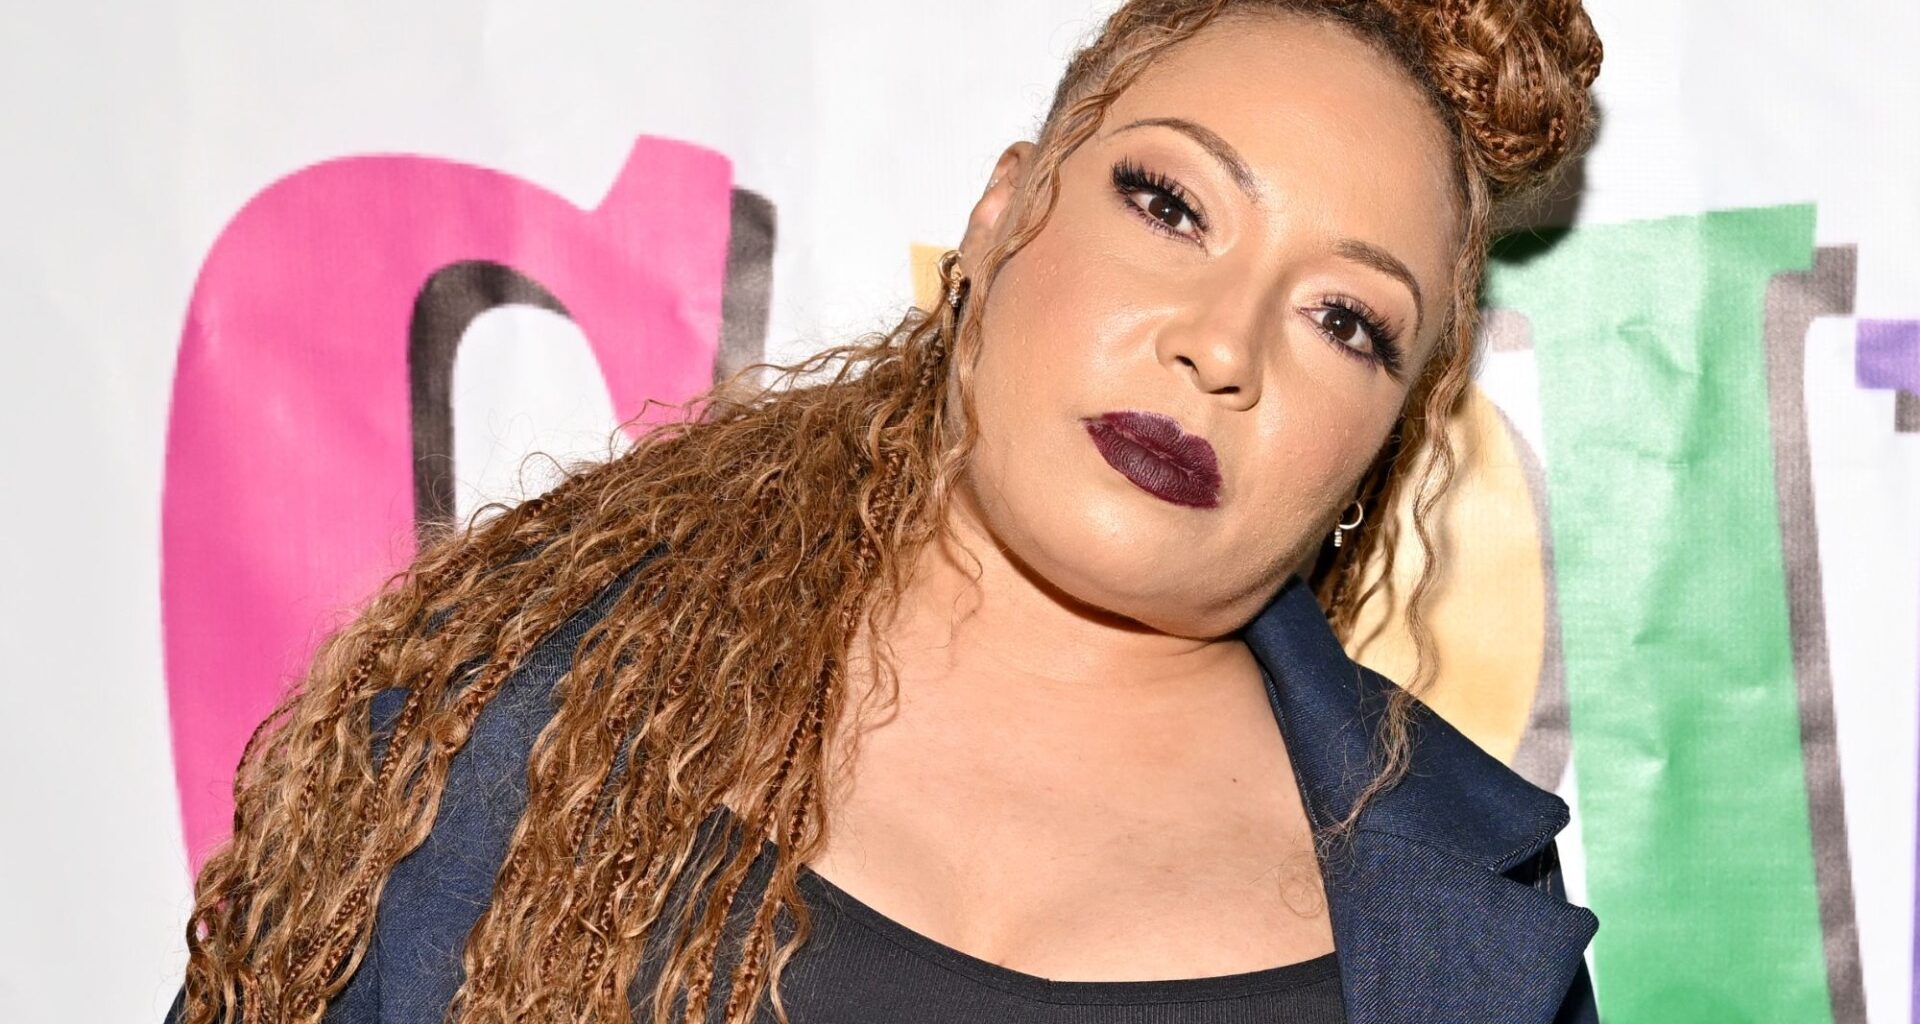 Nineties R&B star, 46, hasn’t aged a day in 27 years since bitter group split and bandmate’s tragic death